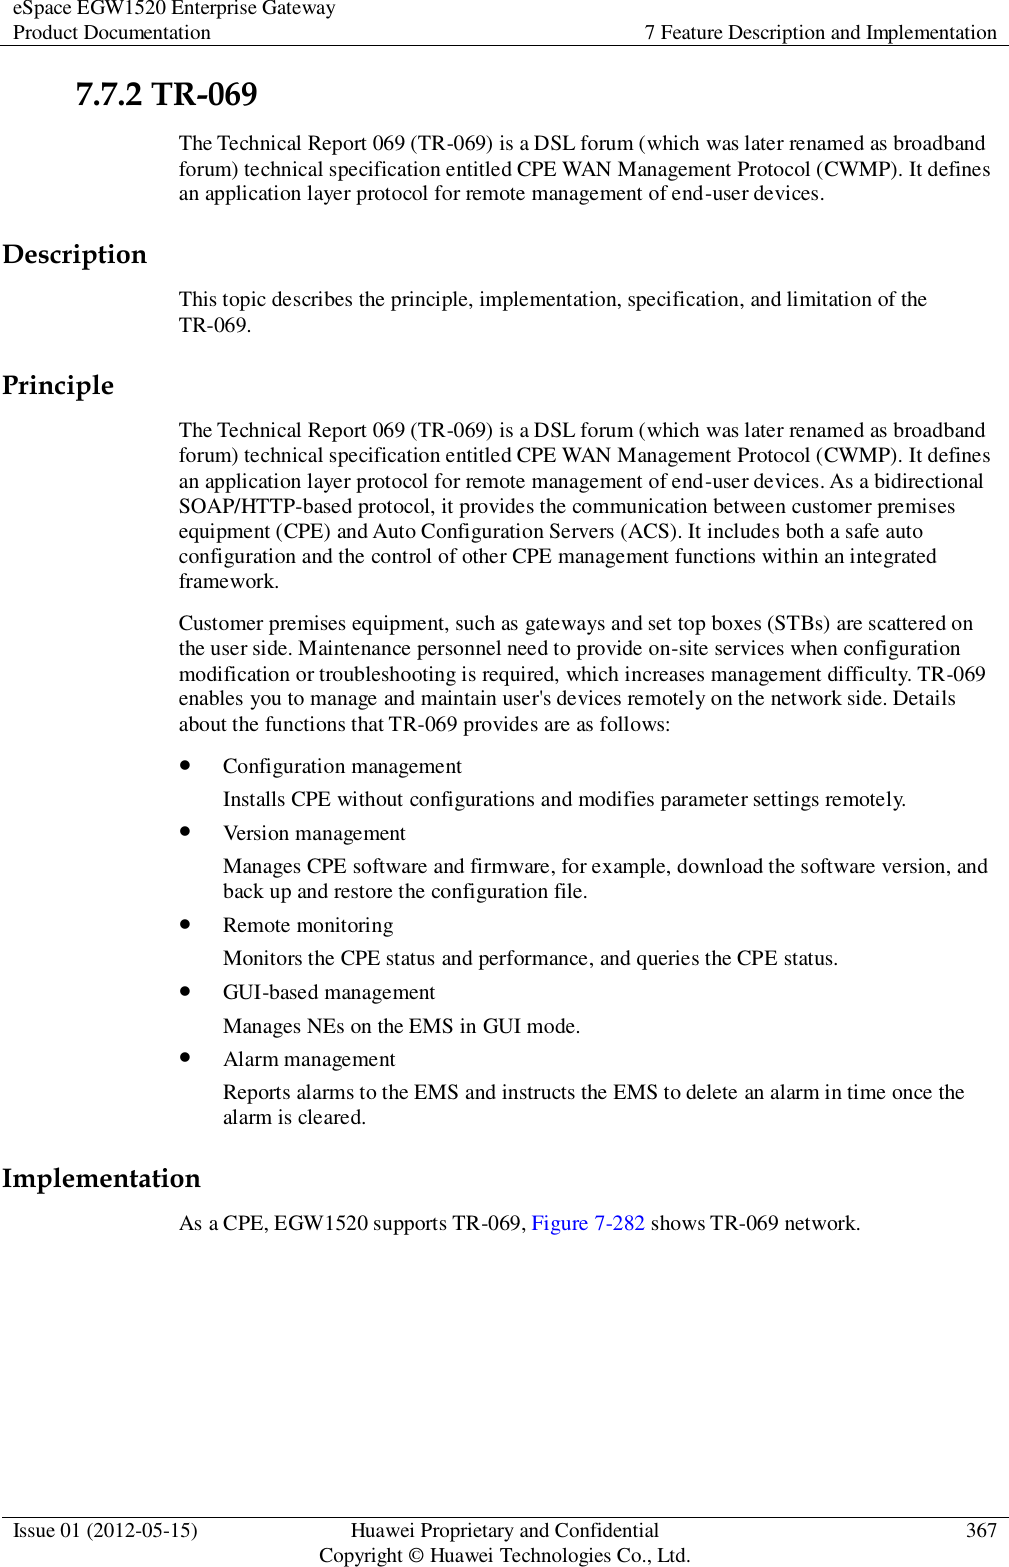 eSpace EGW1520 Enterprise Gateway Product Documentation 7 Feature Description and Implementation  Issue 01 (2012-05-15) Huawei Proprietary and Confidential                                     Copyright © Huawei Technologies Co., Ltd. 367  7.7.2 TR-069 The Technical Report 069 (TR-069) is a DSL forum (which was later renamed as broadband forum) technical specification entitled CPE WAN Management Protocol (CWMP). It defines an application layer protocol for remote management of end-user devices. Description This topic describes the principle, implementation, specification, and limitation of the TR-069. Principle The Technical Report 069 (TR-069) is a DSL forum (which was later renamed as broadband forum) technical specification entitled CPE WAN Management Protocol (CWMP). It defines an application layer protocol for remote management of end-user devices. As a bidirectional SOAP/HTTP-based protocol, it provides the communication between customer premises equipment (CPE) and Auto Configuration Servers (ACS). It includes both a safe auto configuration and the control of other CPE management functions within an integrated framework. Customer premises equipment, such as gateways and set top boxes (STBs) are scattered on the user side. Maintenance personnel need to provide on-site services when configuration modification or troubleshooting is required, which increases management difficulty. TR-069 enables you to manage and maintain user&apos;s devices remotely on the network side. Details about the functions that TR-069 provides are as follows:  Configuration management Installs CPE without configurations and modifies parameter settings remotely.  Version management Manages CPE software and firmware, for example, download the software version, and back up and restore the configuration file.  Remote monitoring Monitors the CPE status and performance, and queries the CPE status.  GUI-based management Manages NEs on the EMS in GUI mode.  Alarm management Reports alarms to the EMS and instructs the EMS to delete an alarm in time once the alarm is cleared. Implementation As a CPE, EGW1520 supports TR-069, Figure 7-282 shows TR-069 network. 